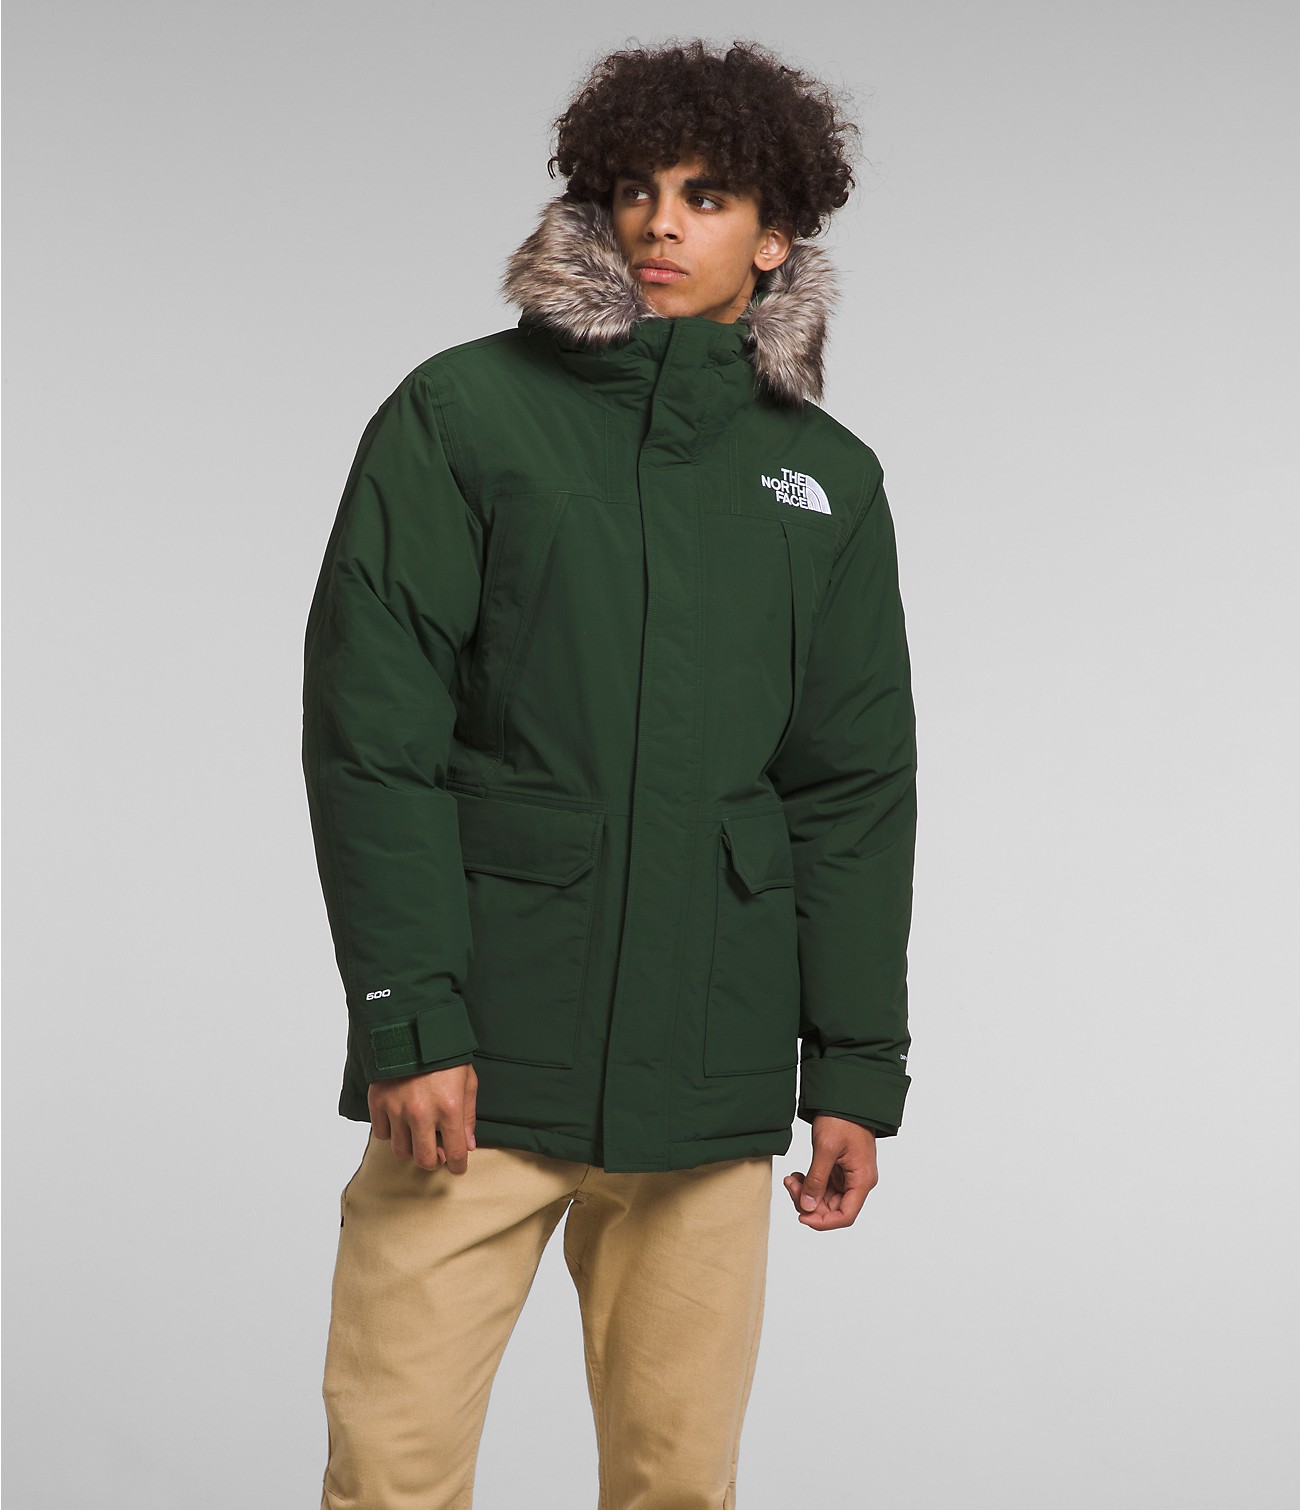 Unlock Wilderness' choice in the L.L.Bean Vs North Face comparison, the McMurdo Parka by The North Face